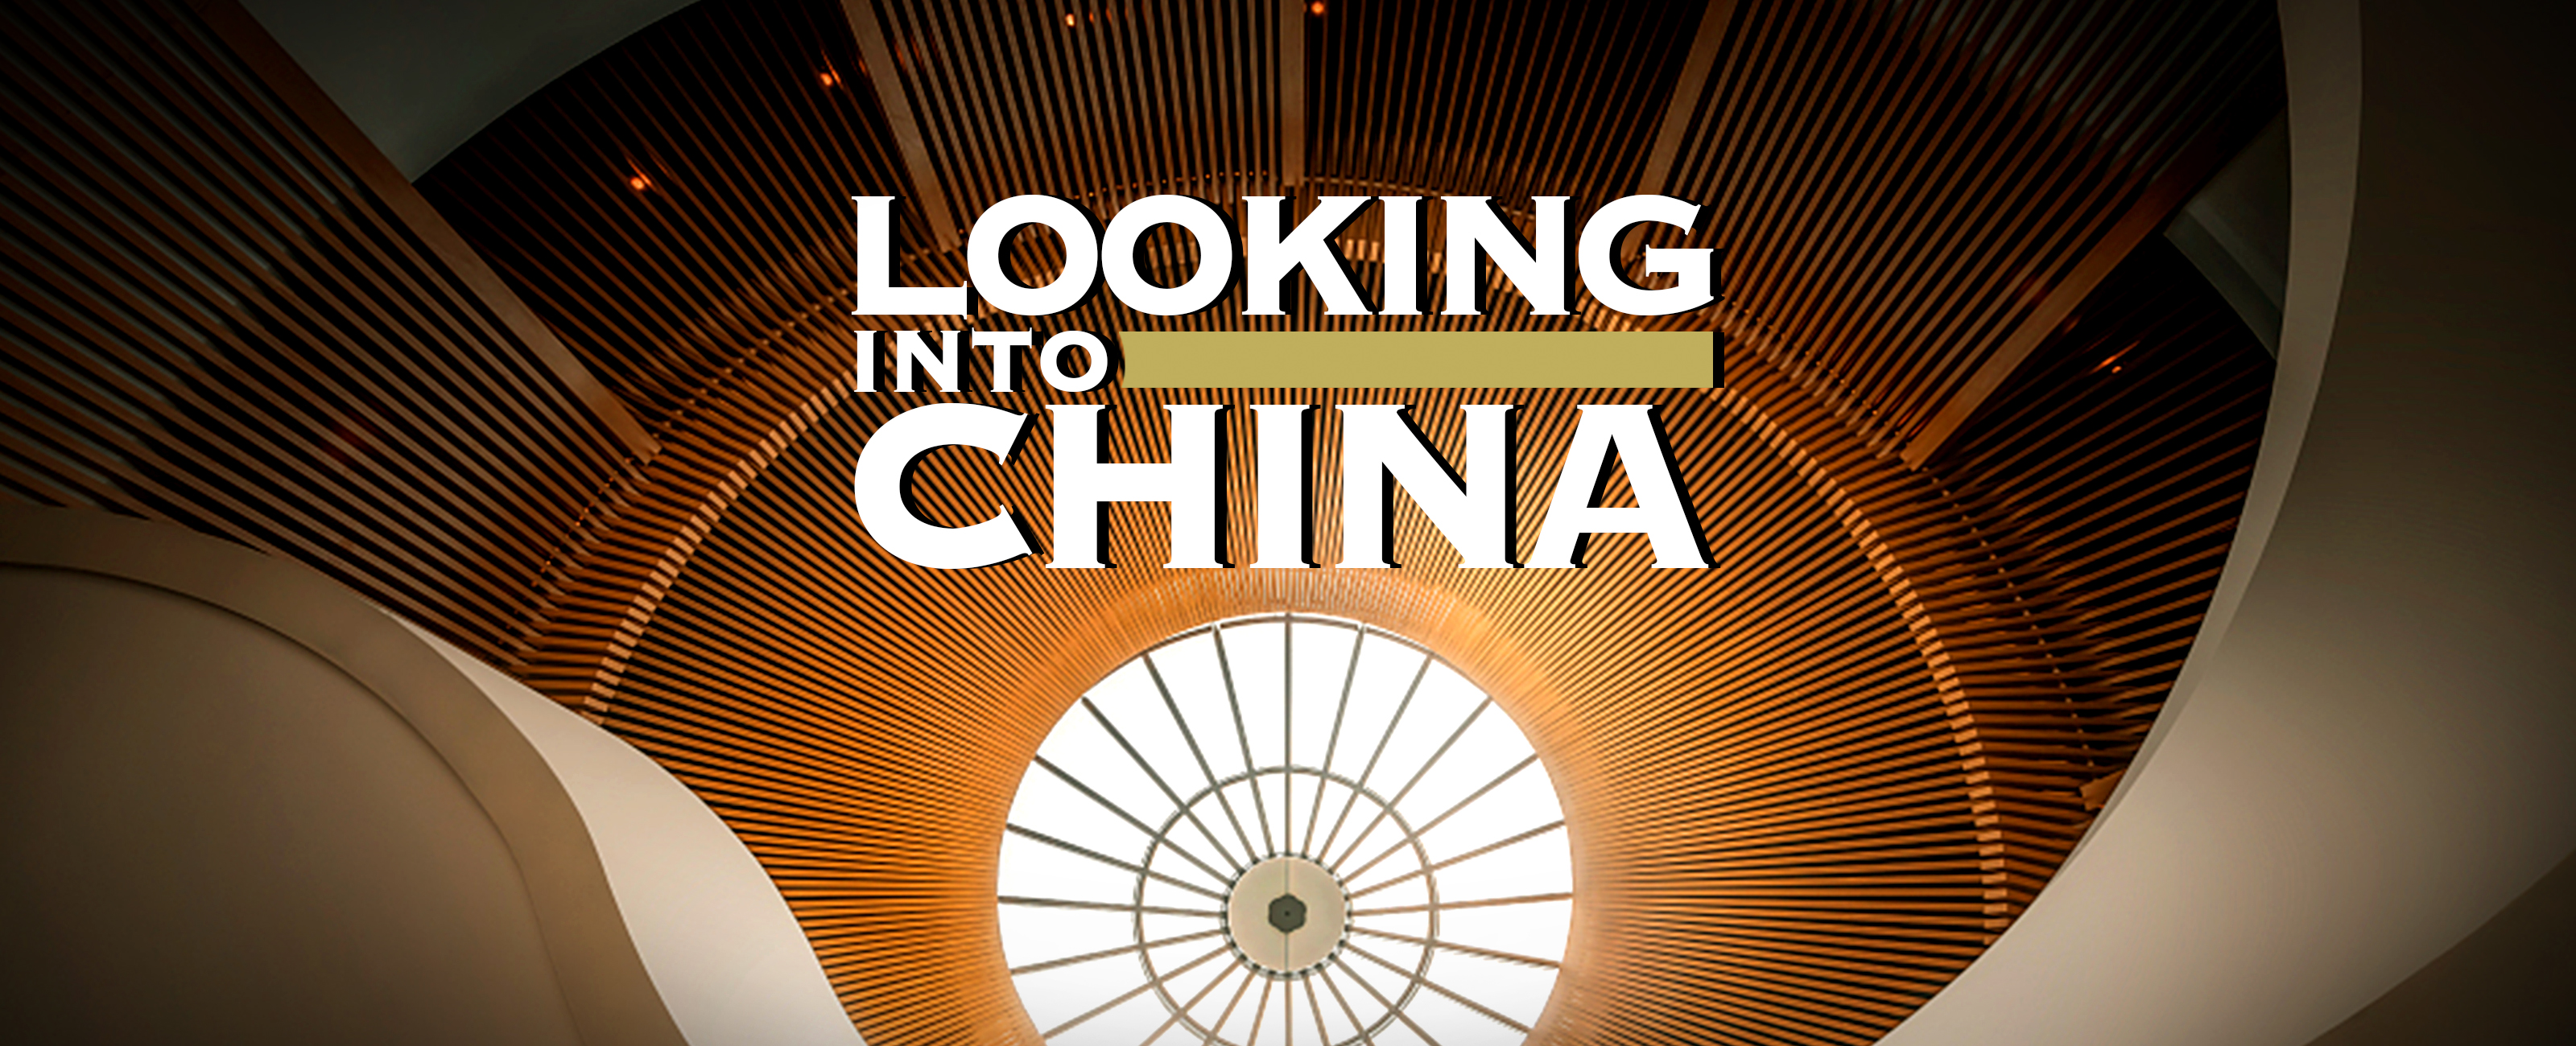 Looking into China